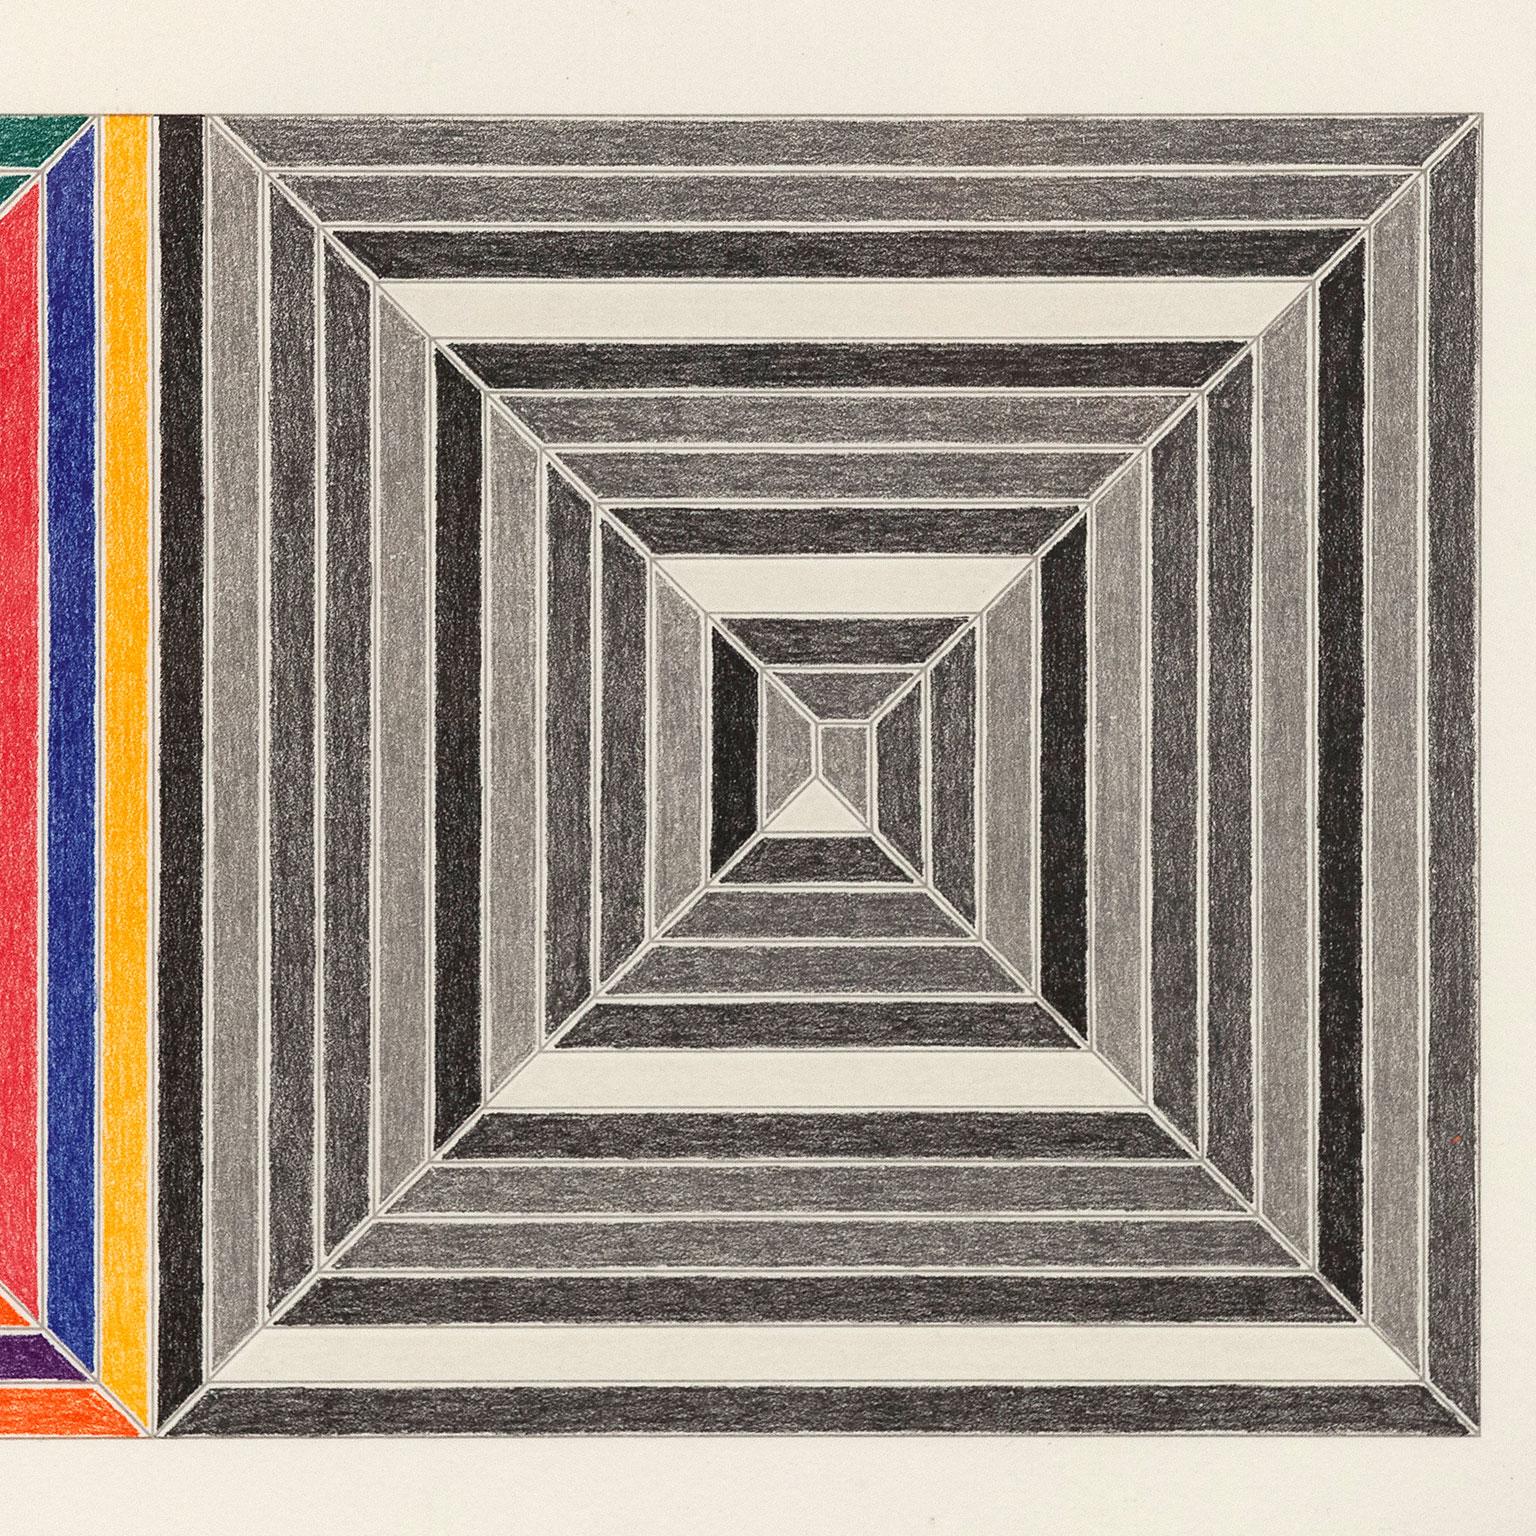 The title of this series of Frank Stella lithographs, 